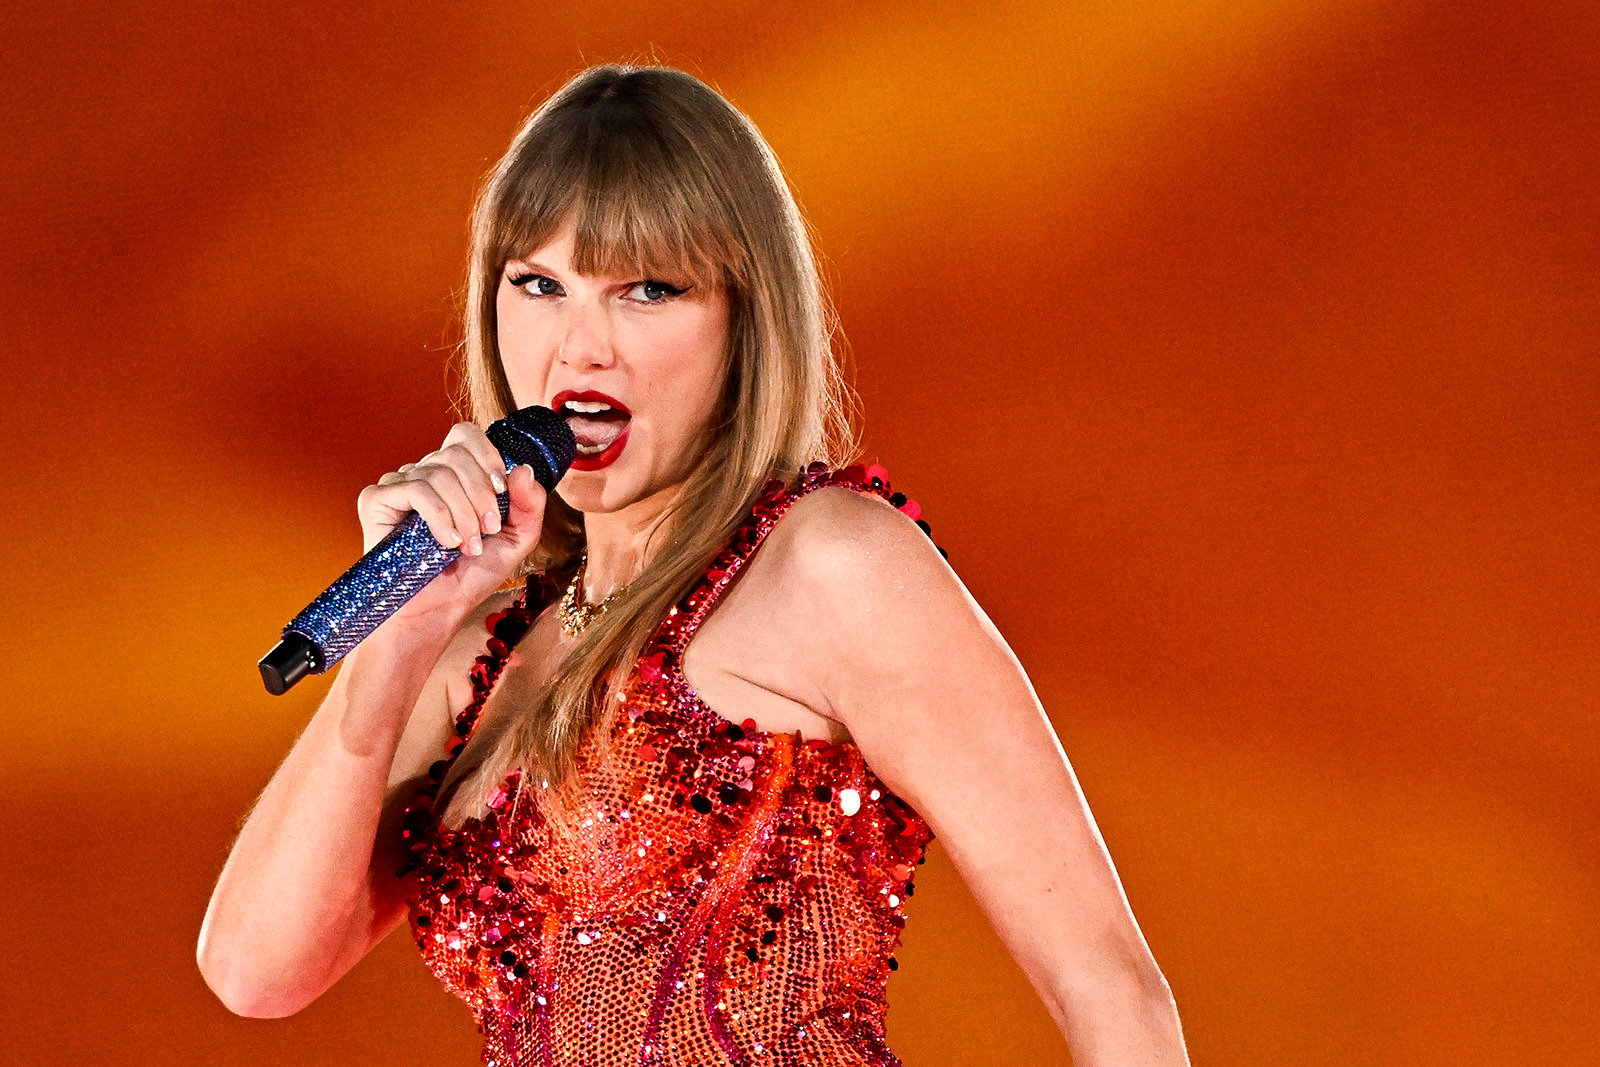 Taylor Swift performs in Paris. With tickets to her live shows in North America costing more than US$1,000 a ticket and double that on resale, some American Swifties have flown to Europe where prices are much lower, and had a holiday too. Photo: TNS